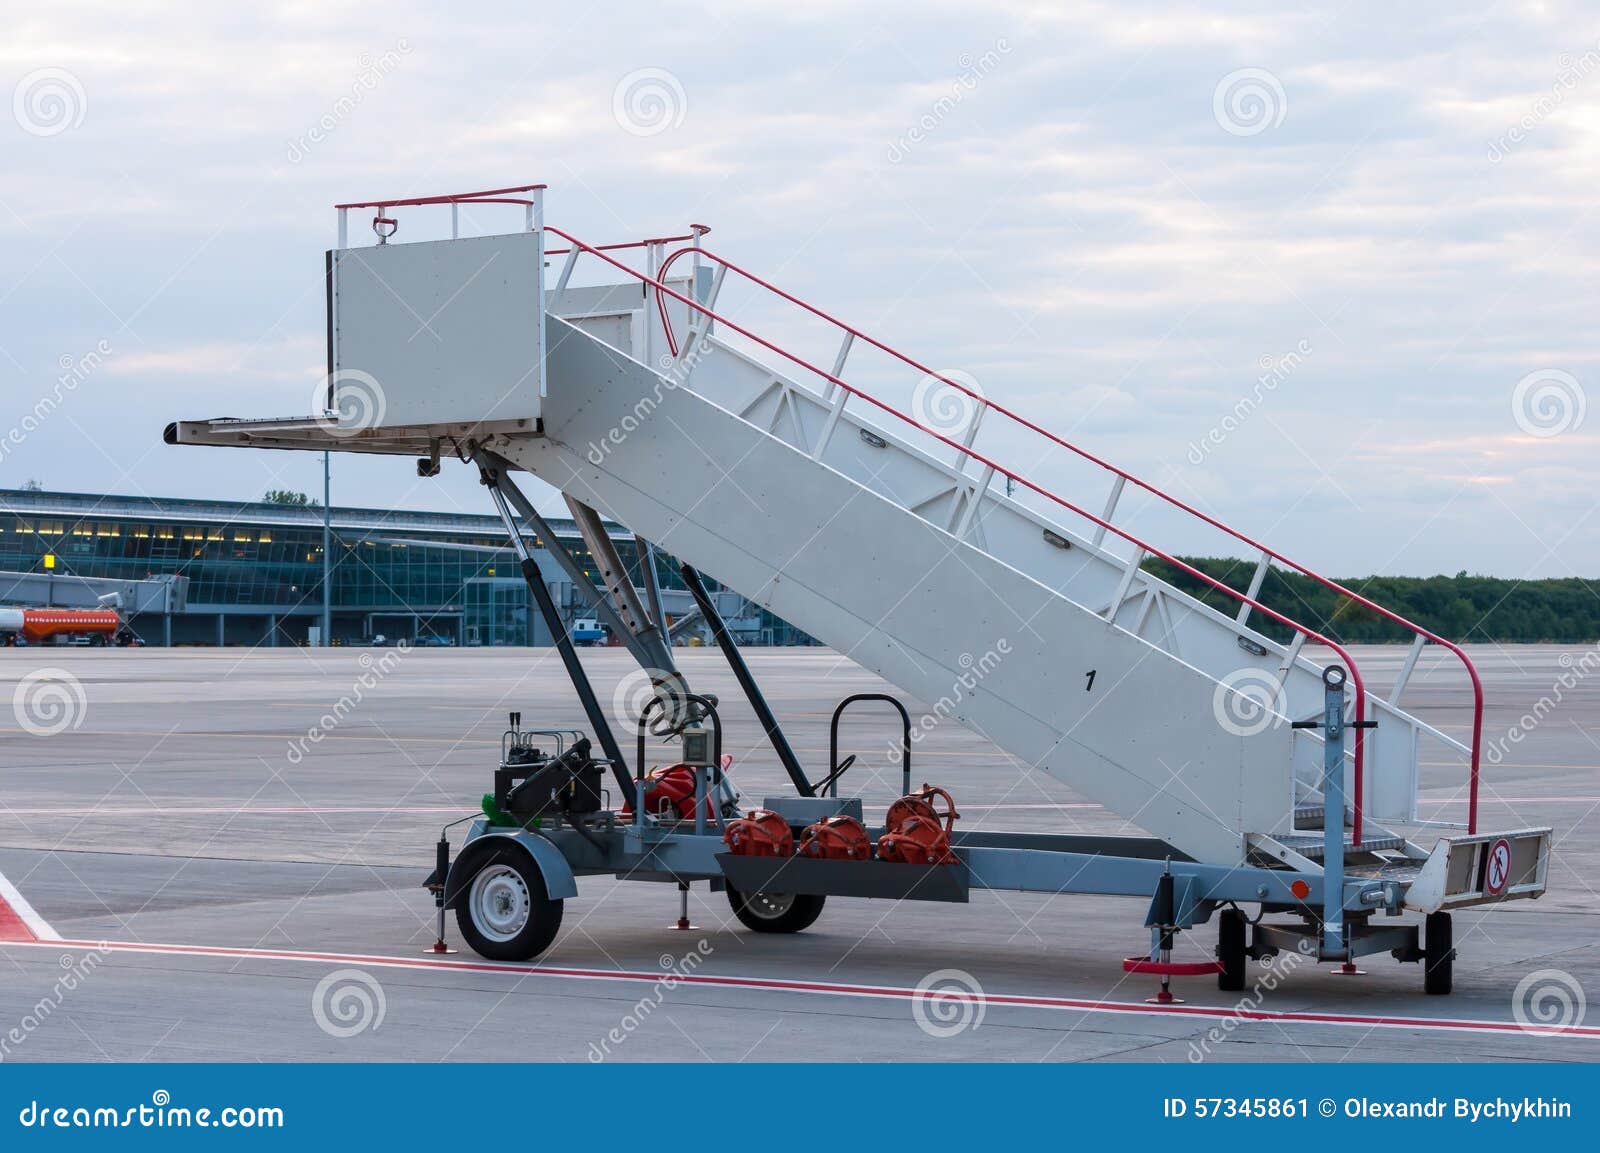 the image of a movable boarding ramp at the